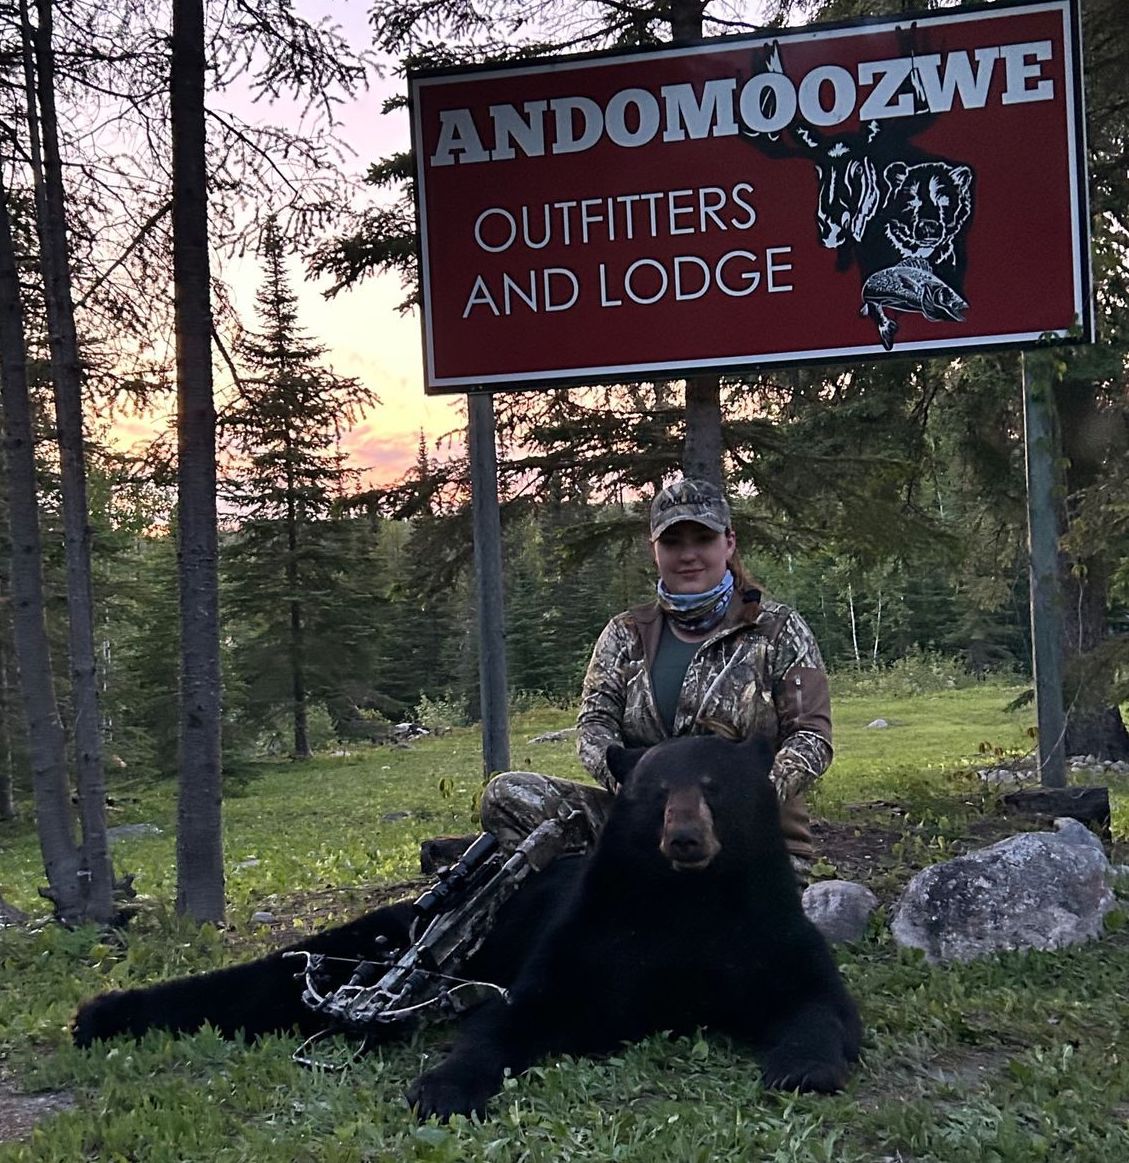 a woman in camouflage hunting gear poses with her bow and a bear she shot, in a green forest in front of a pink sunset. A red sign above reads 'Andomoozwe Outfitters and Lodge'.